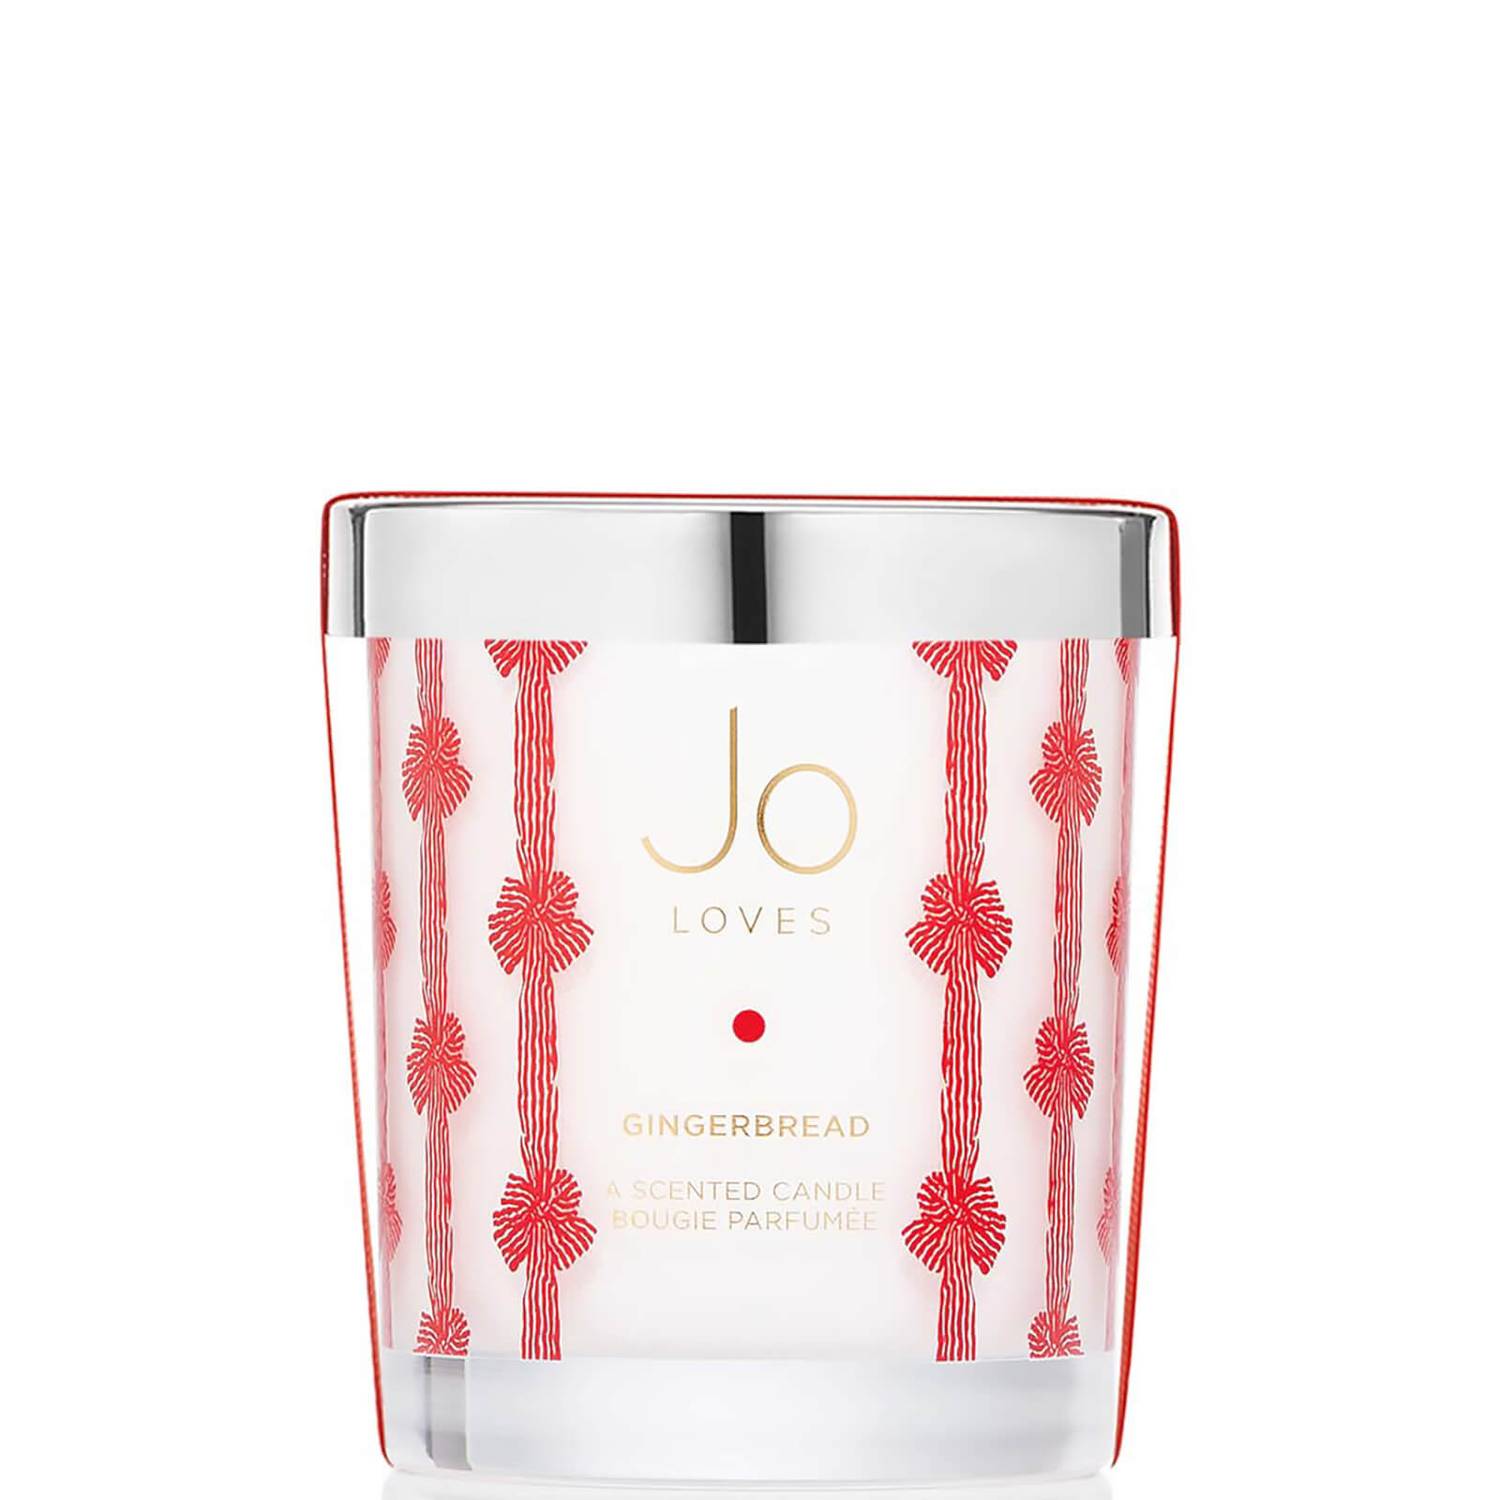 Jo Loves Gingerbread Home Candle